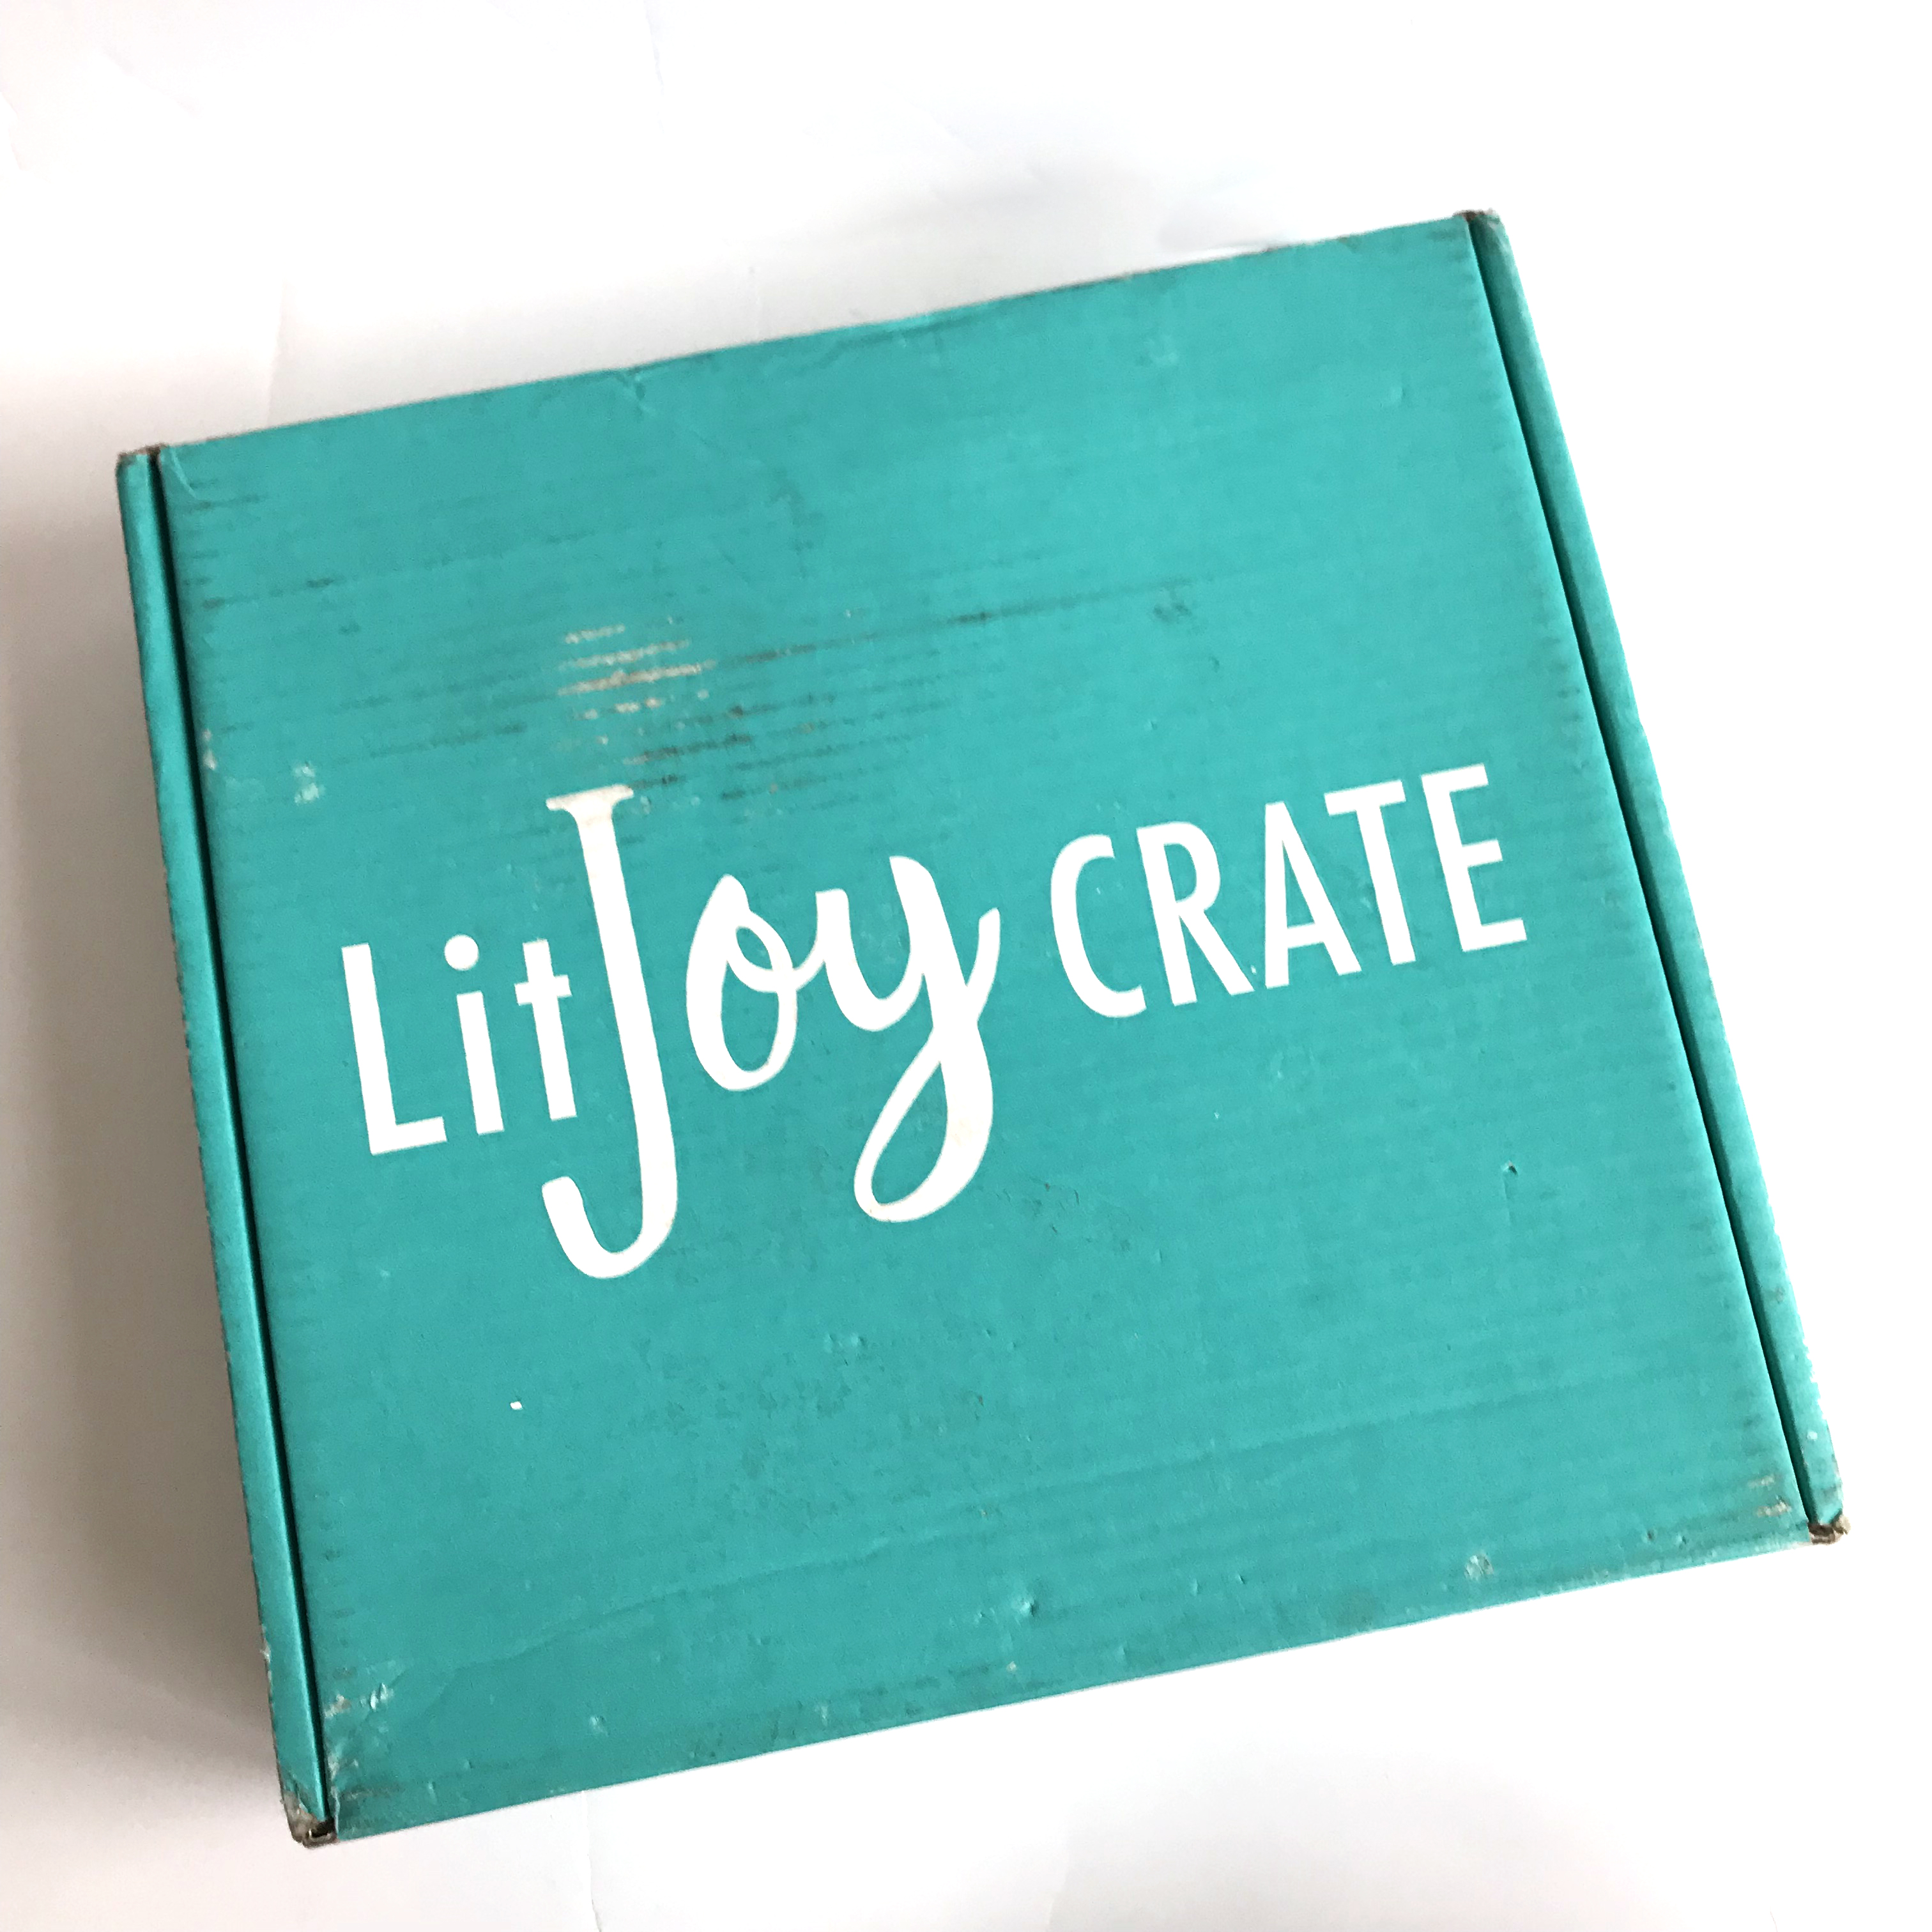 LitJoy Crate “Unplugged” Picture Book Box Review + Coupon